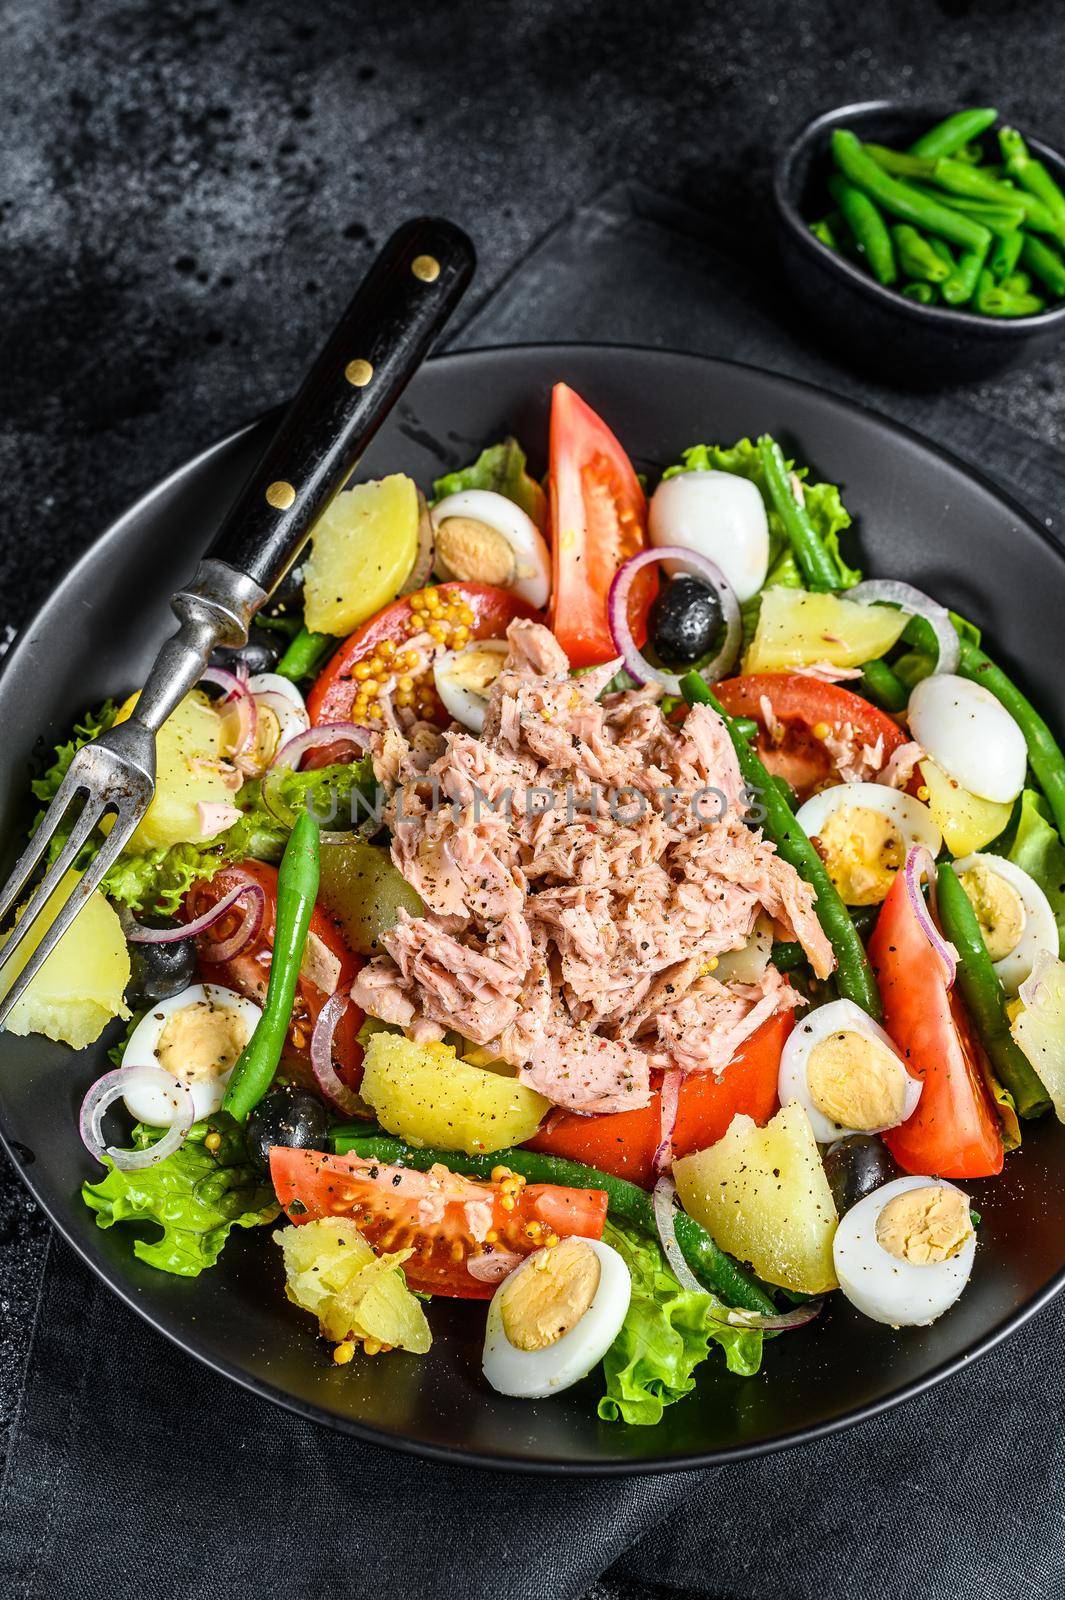 Tuna salad nicoise with vegetables, eggs and anchovies in a plate. Black background. top view by Composter